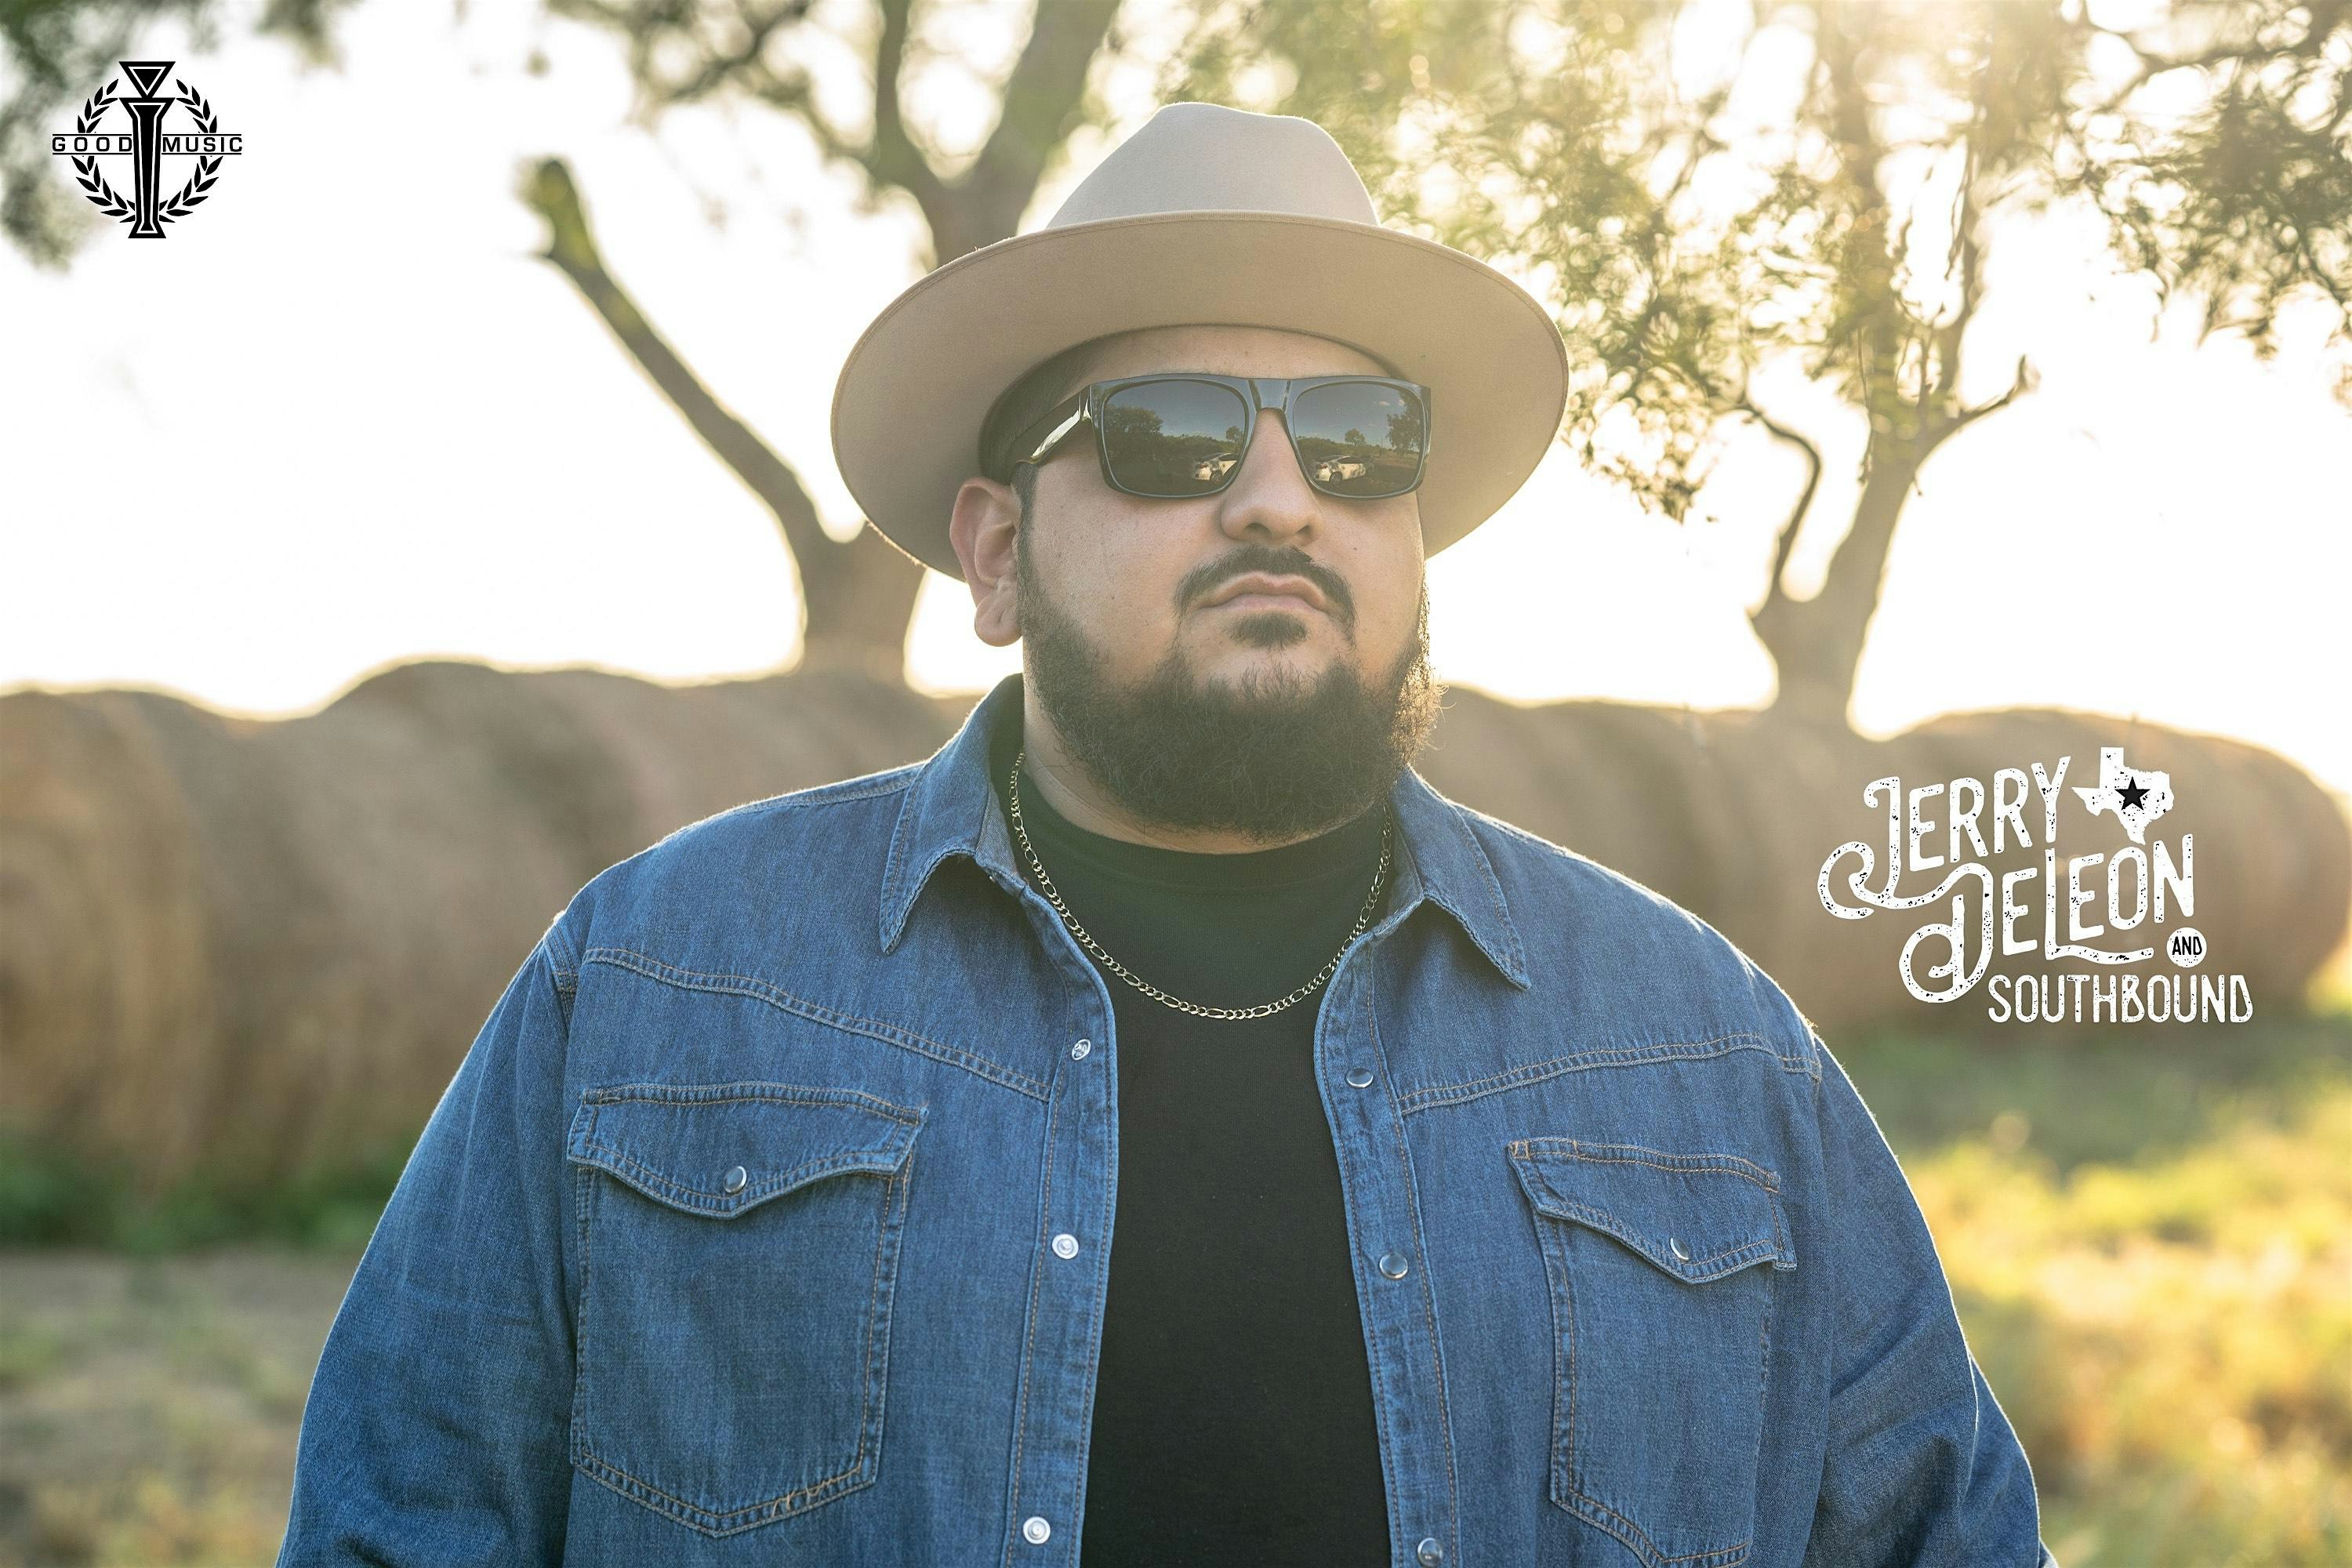 Jerry De Leon and Southbound – Show and Dance